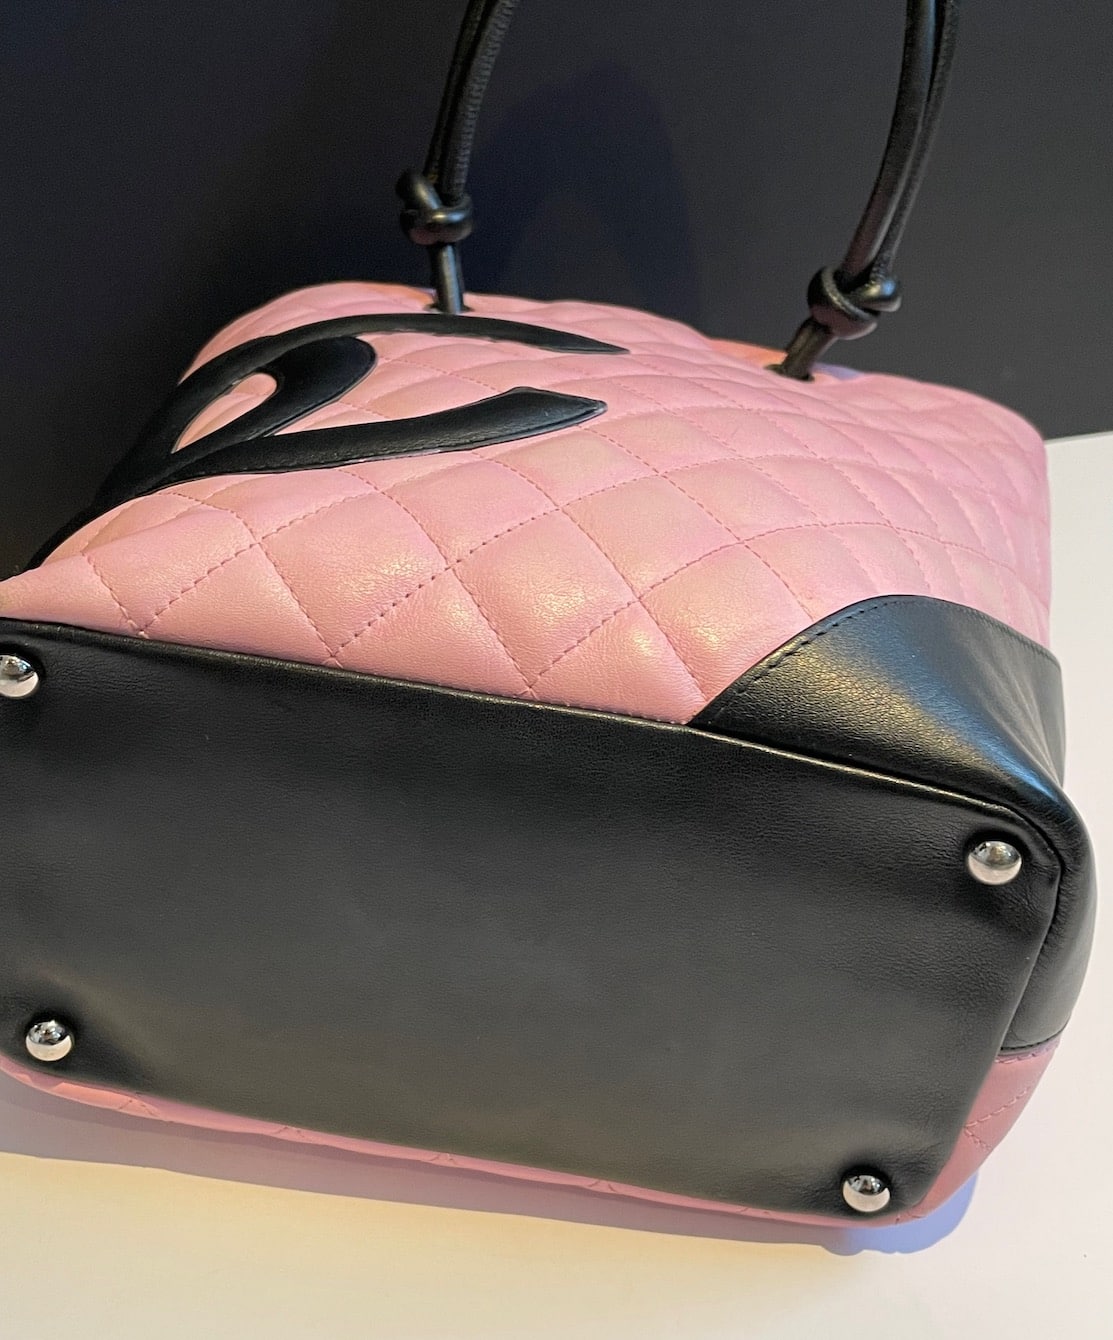 CHANEL Pink & Black Quilted Calfskin Leather Small Cambon CC Logo